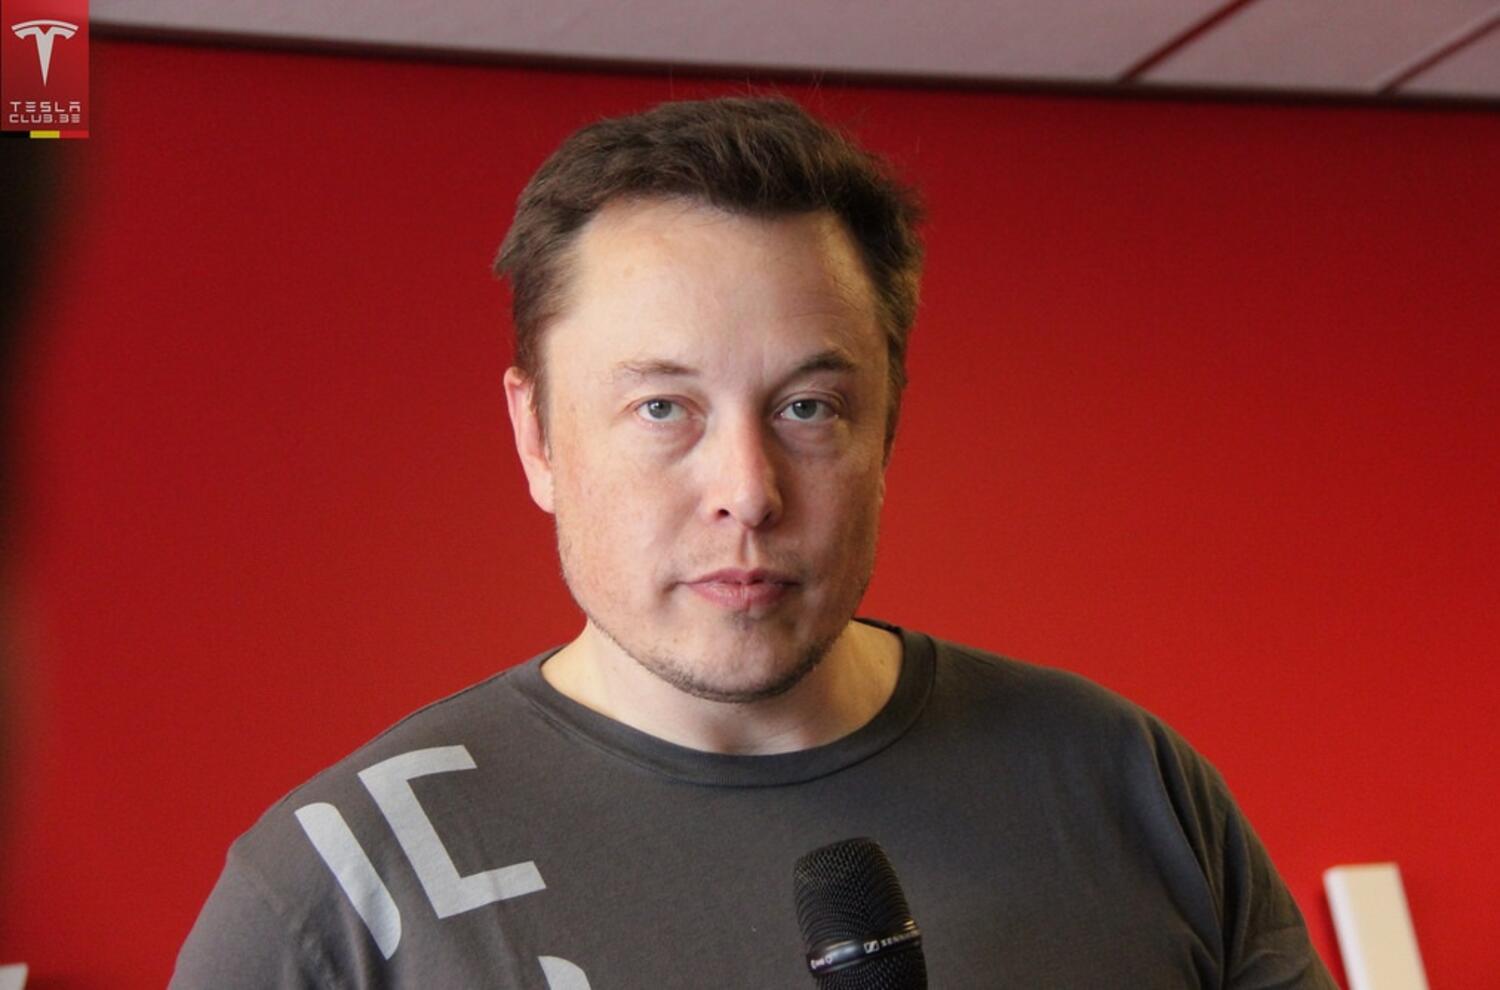  How Elon Musk Can Become a "For All" Leader